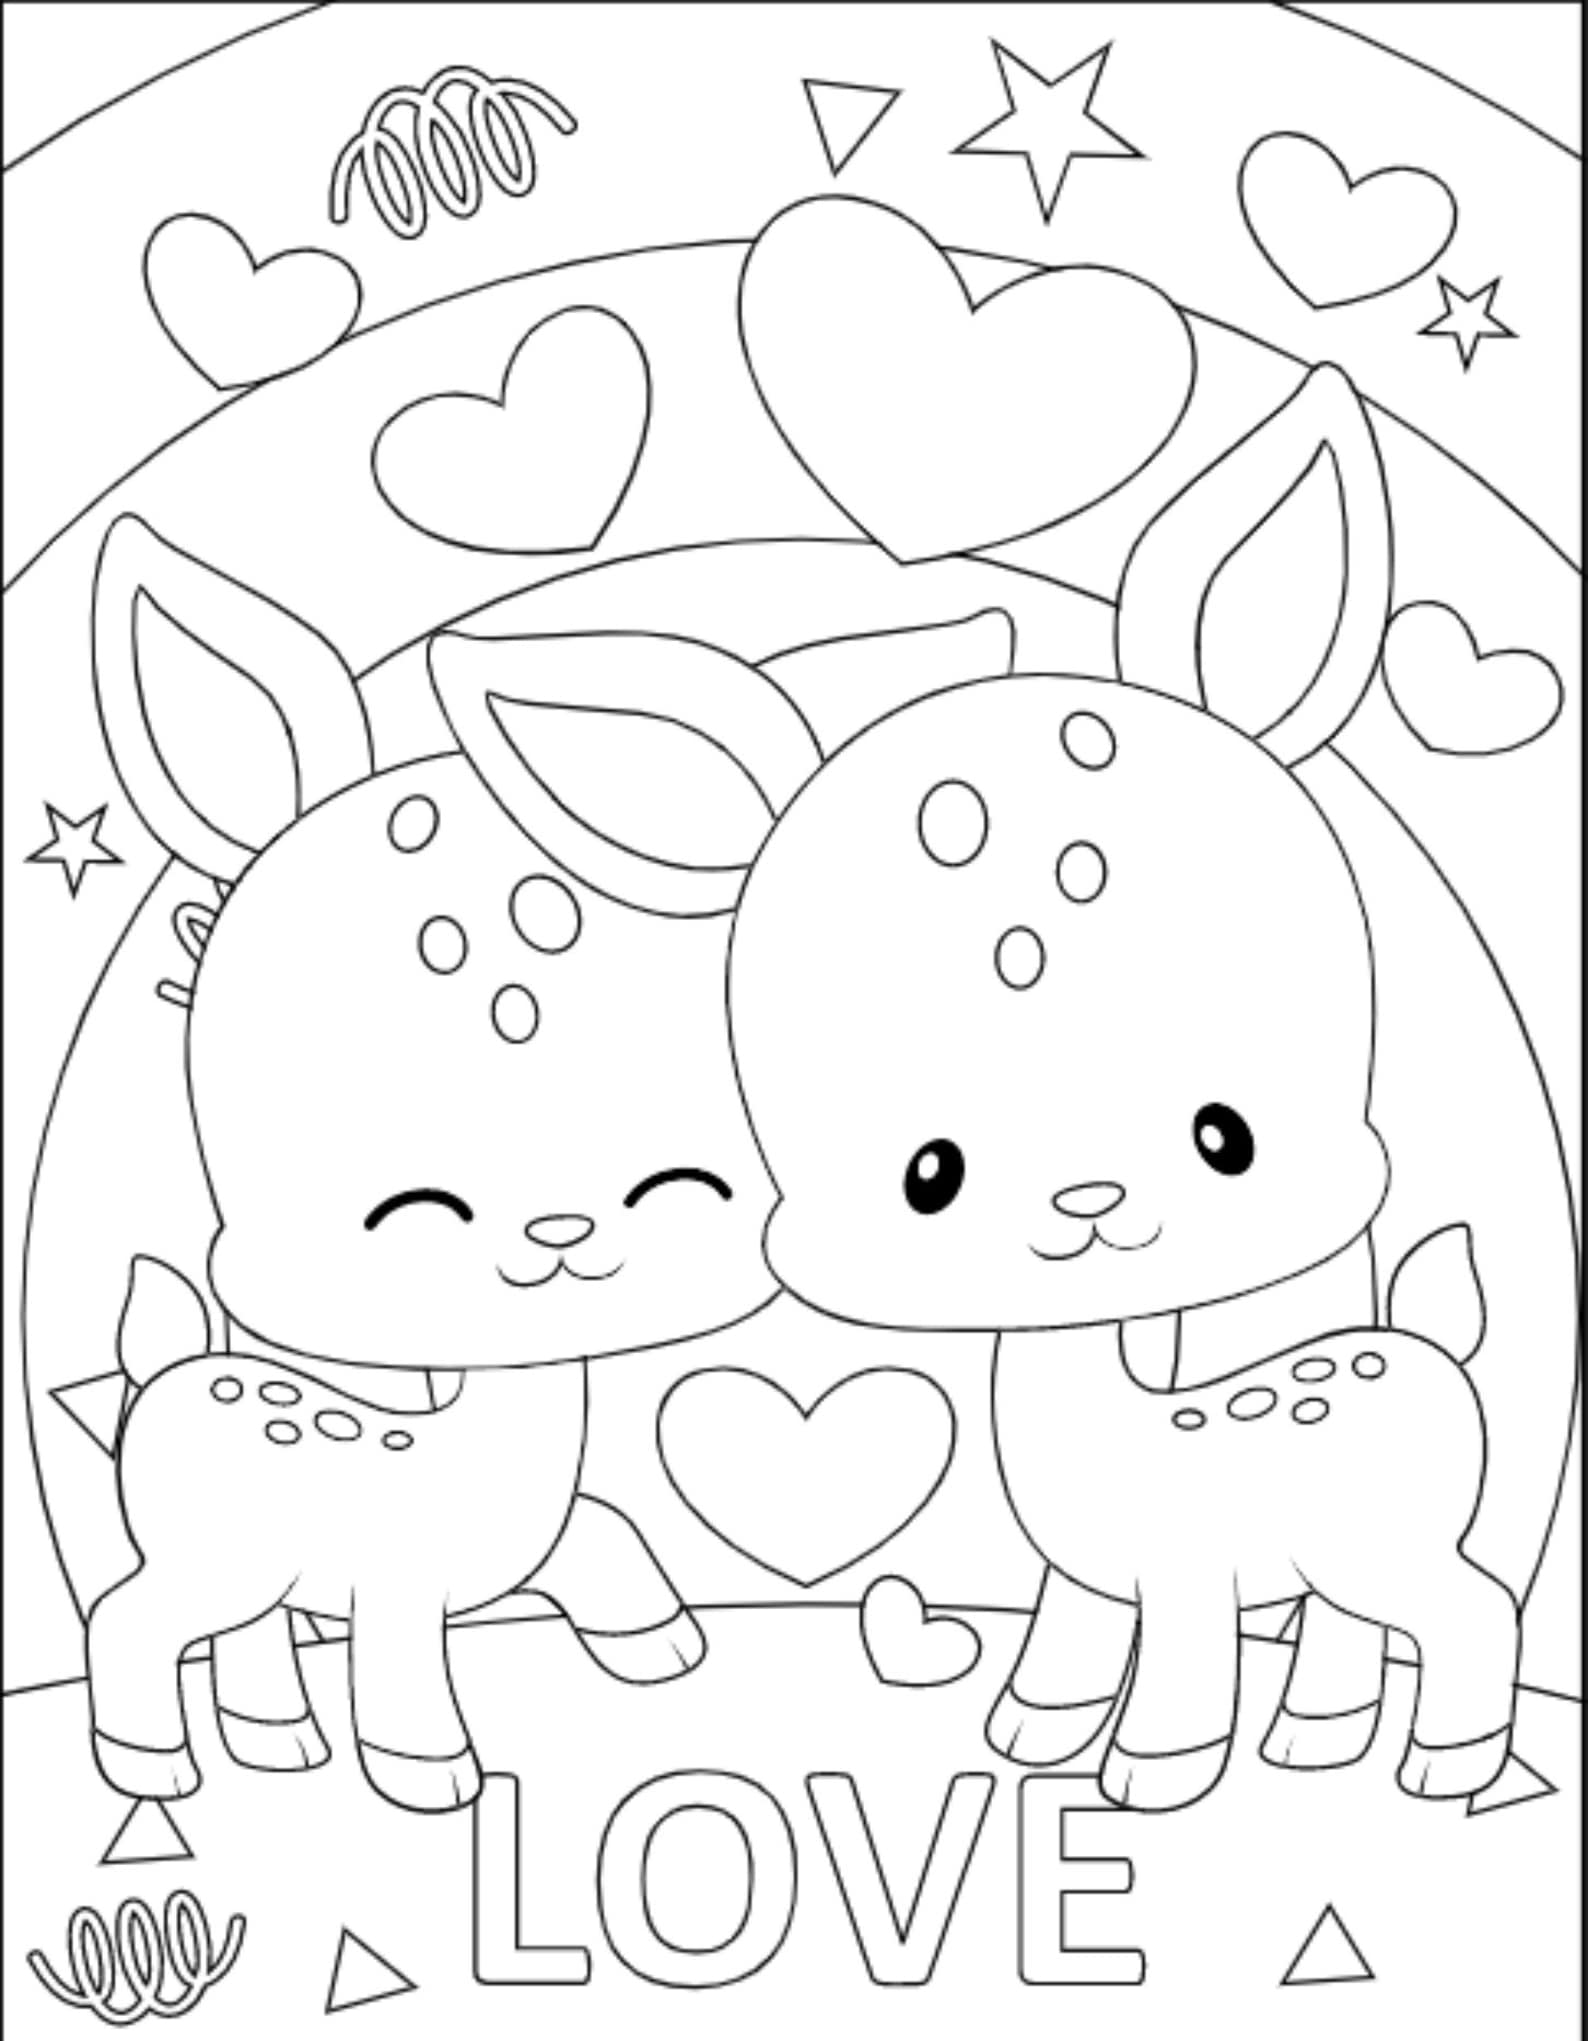 Cute Valentine Animals Coloring Pages Set 1 - Etsy